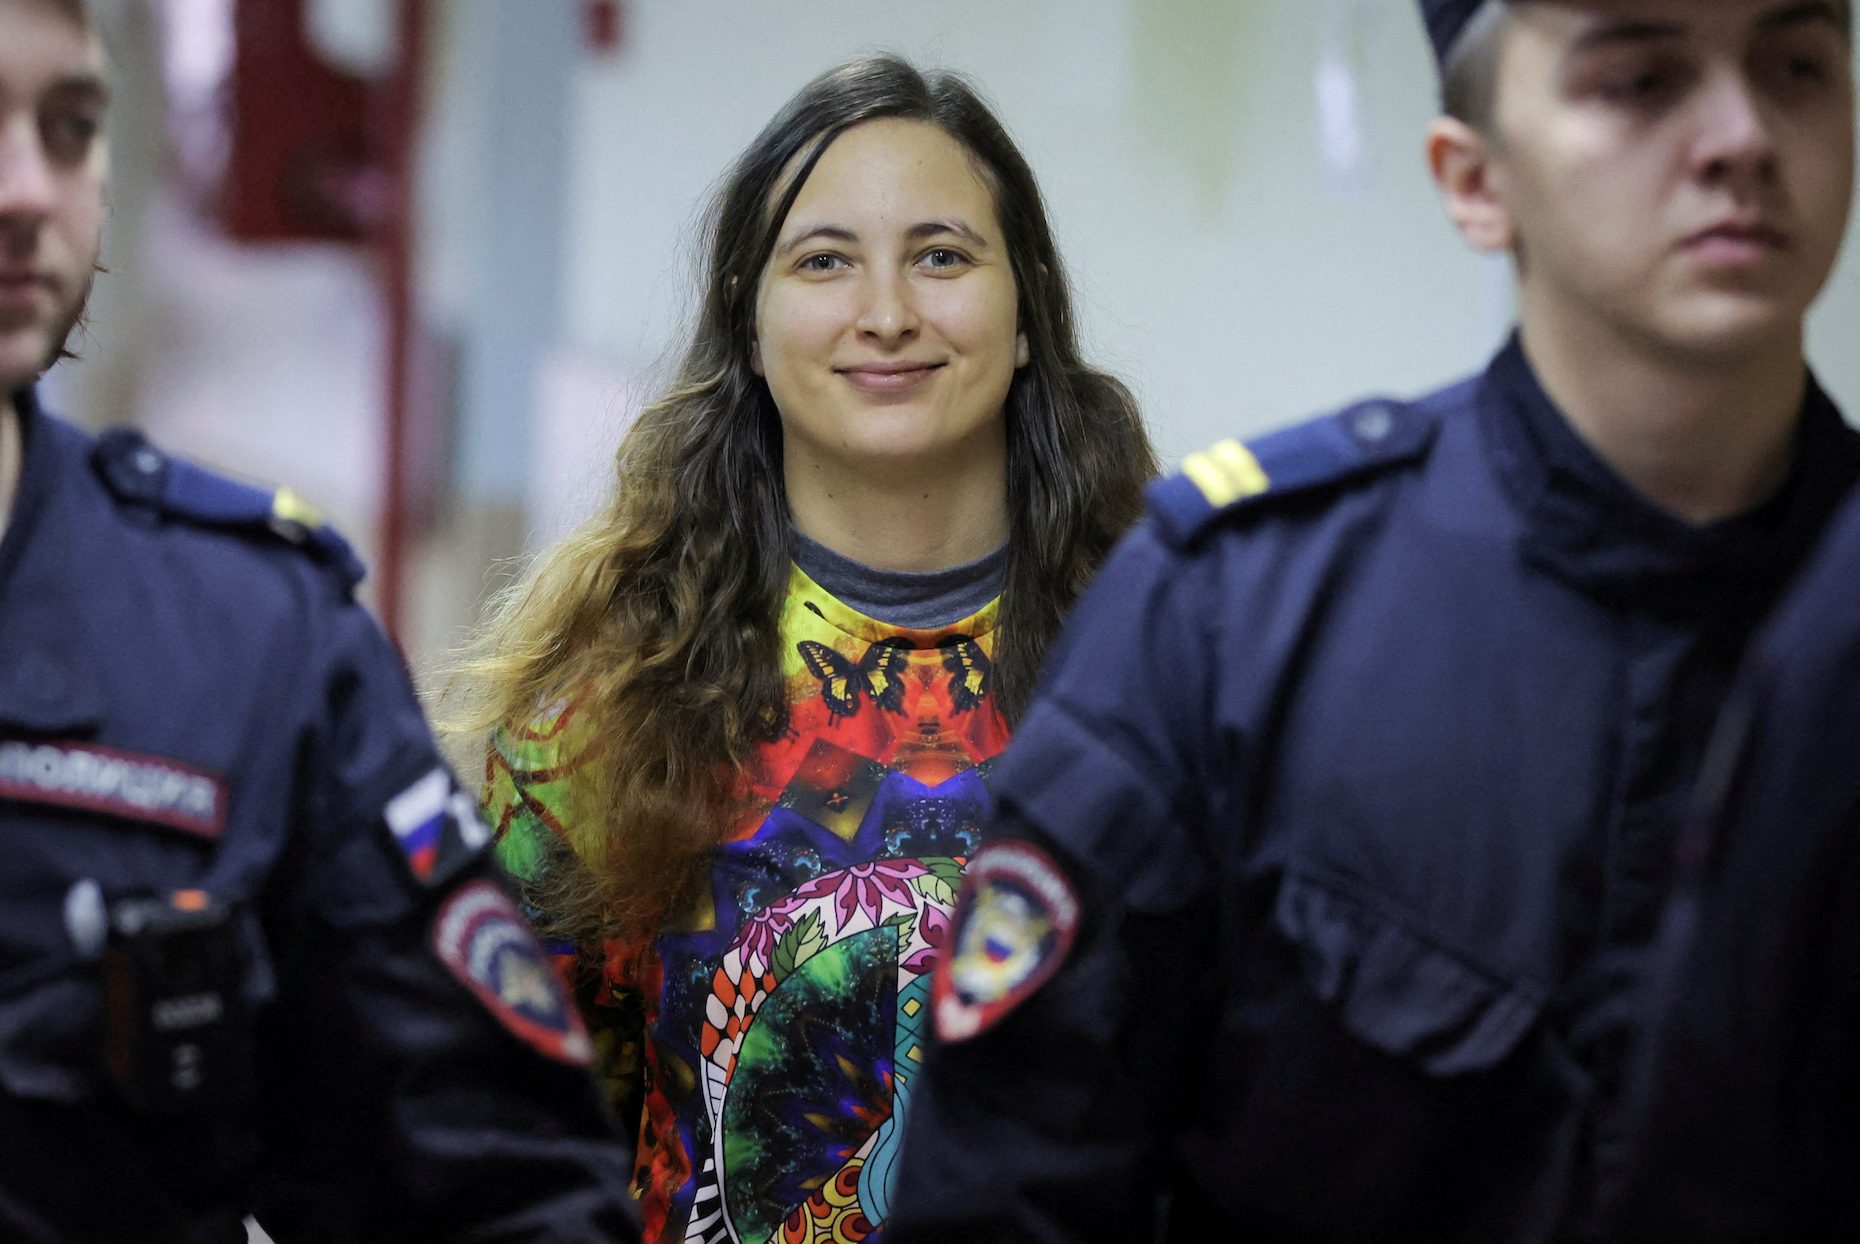 Russian artist on trial for anti-war protest appeals for compassion